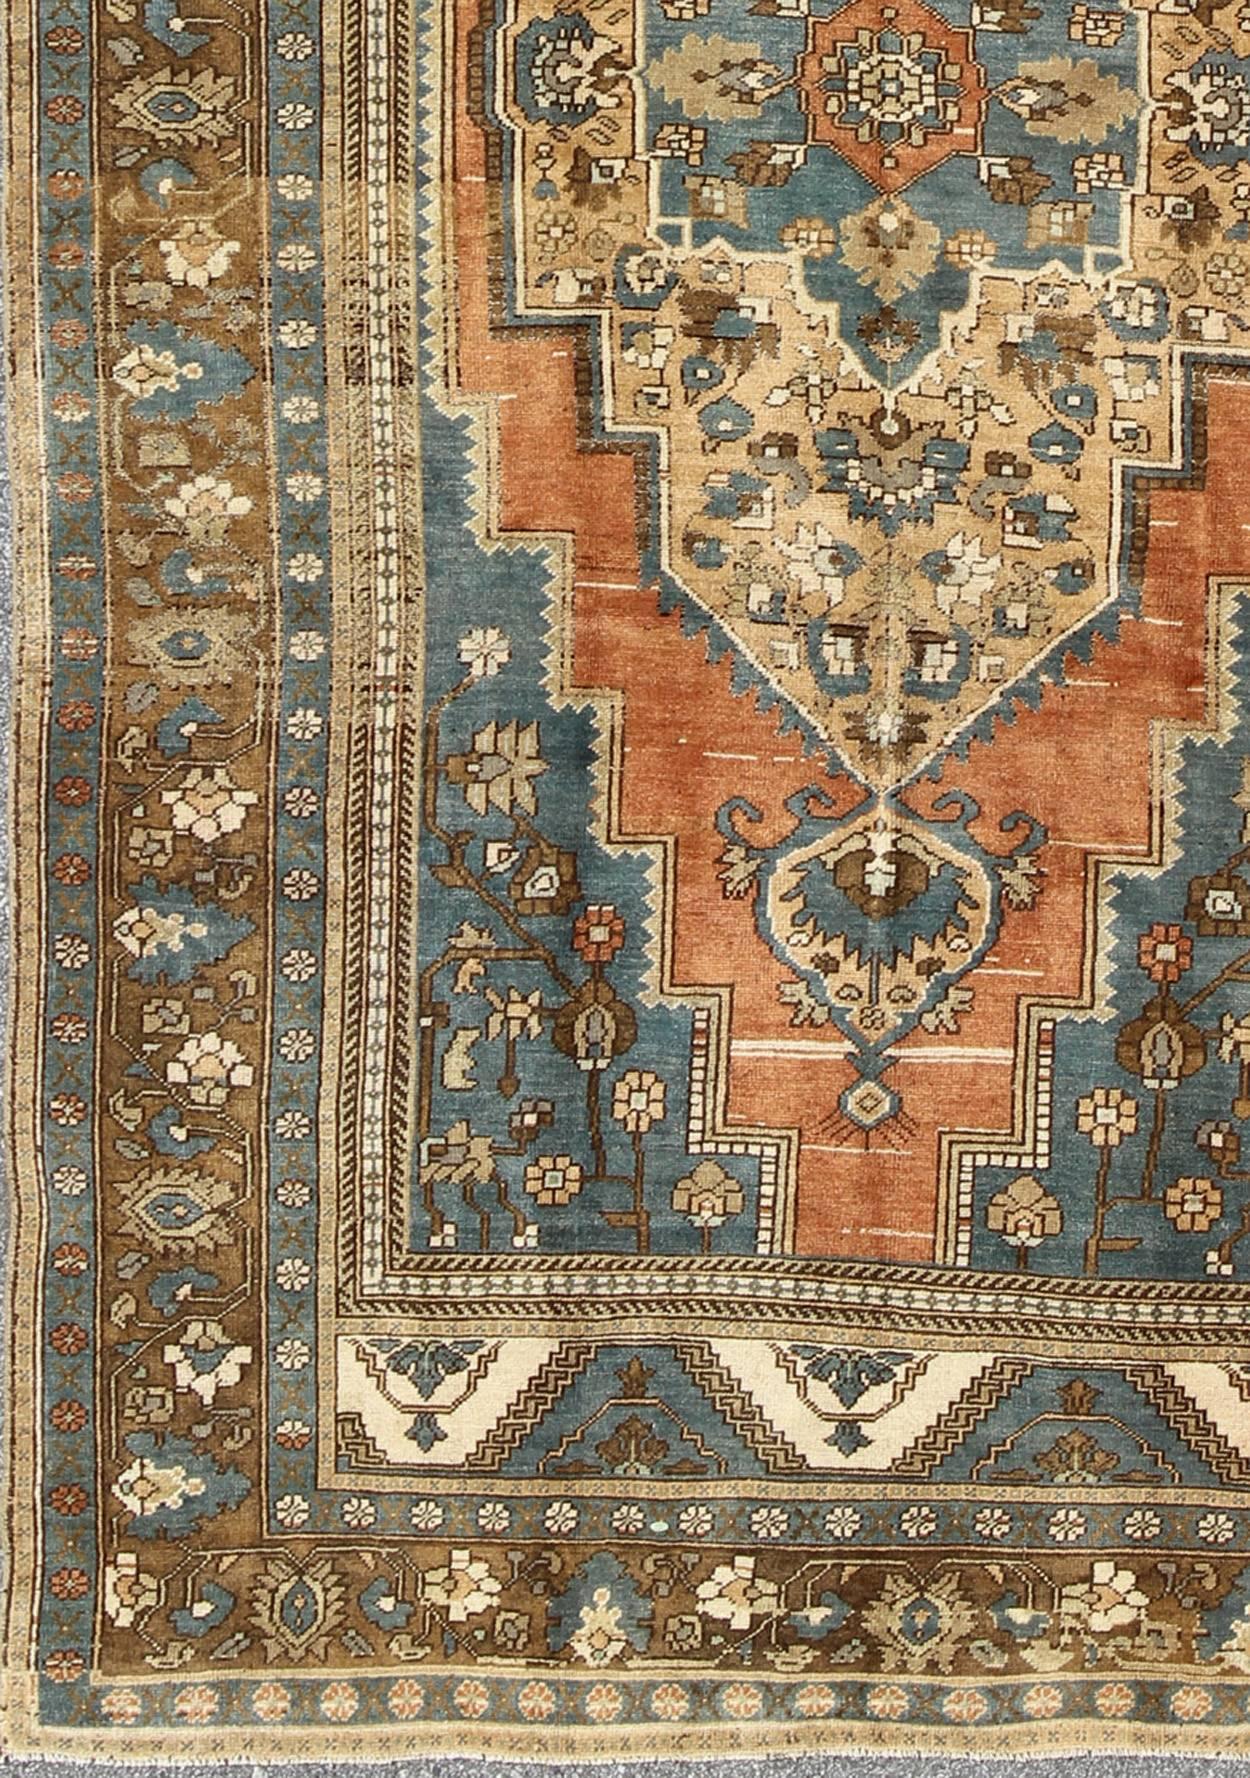 Antique Turkish Colorful Oushak Gallery Rug In Blue Brown & Terra-cotta. Rug/EN-AGA-004, Colorful Oushak, Antique Oushak.
A singularly masterful work of art, this richly patterned antique Turkish Oushak carpet balances a perfect blend of geometric